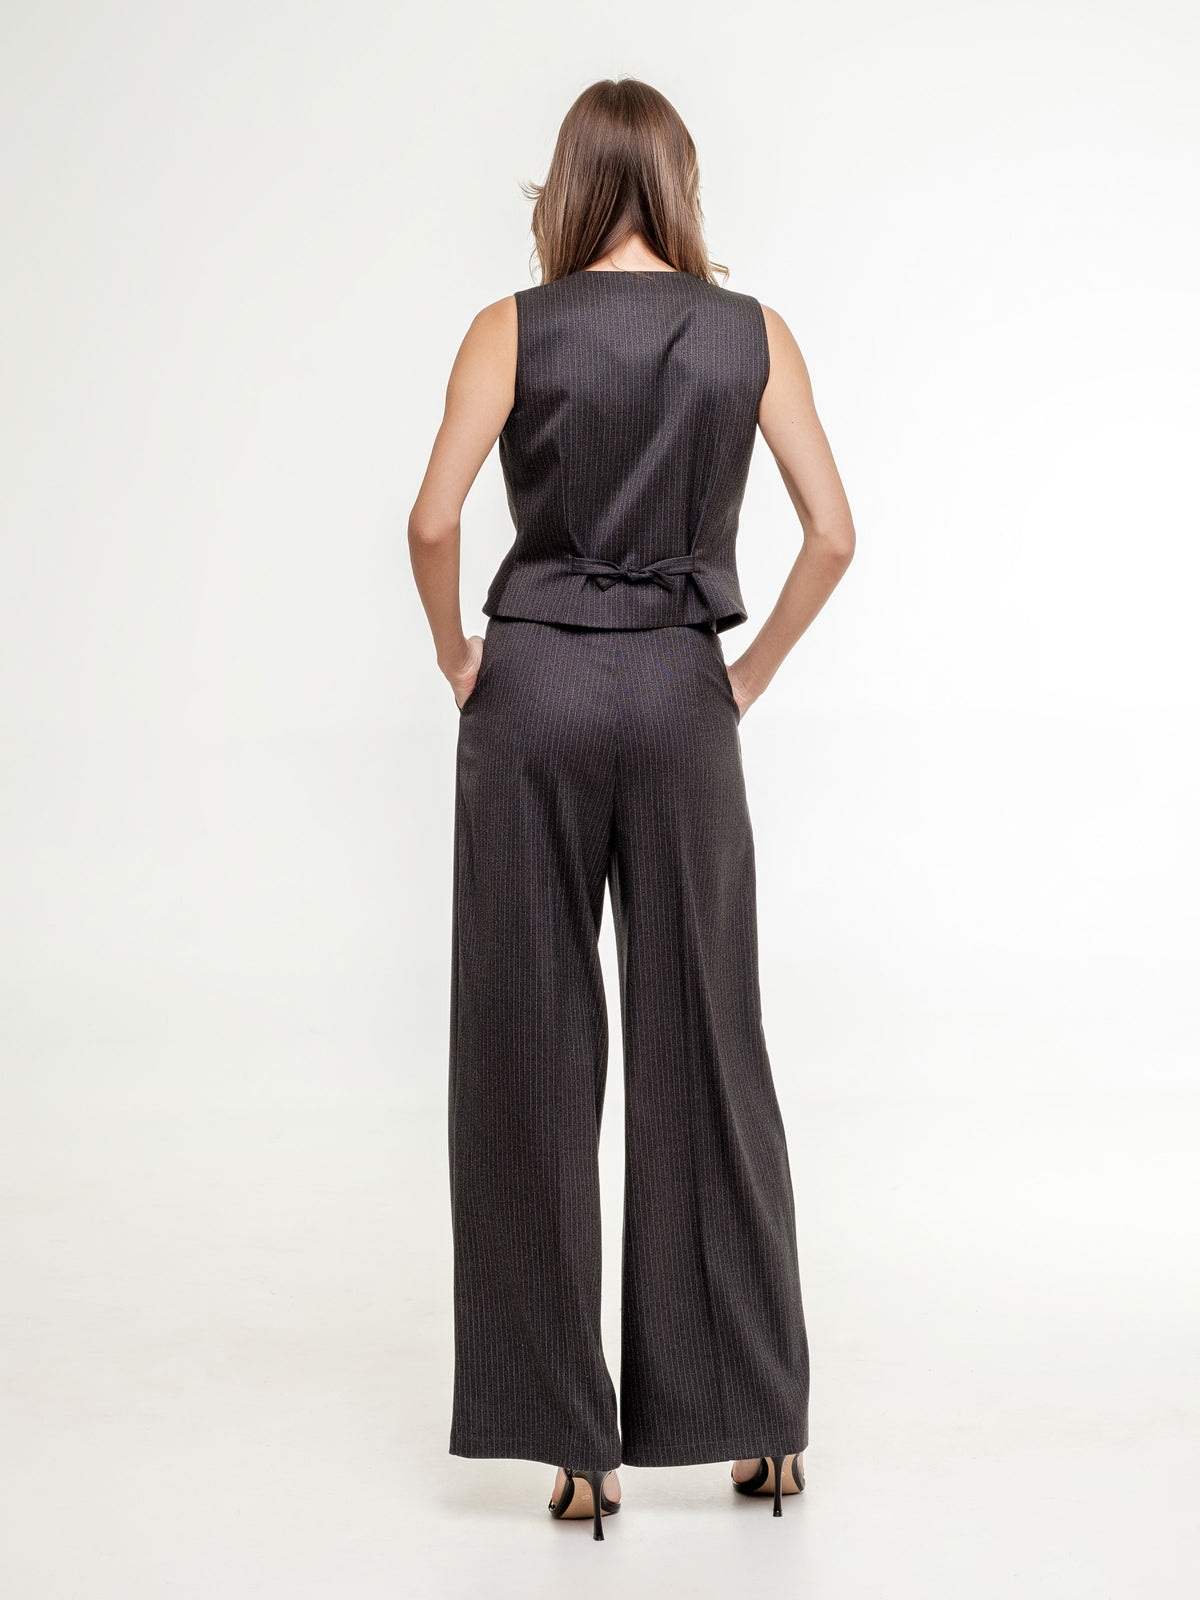 2 piece set dark grey vest and wide trousers view from the back 